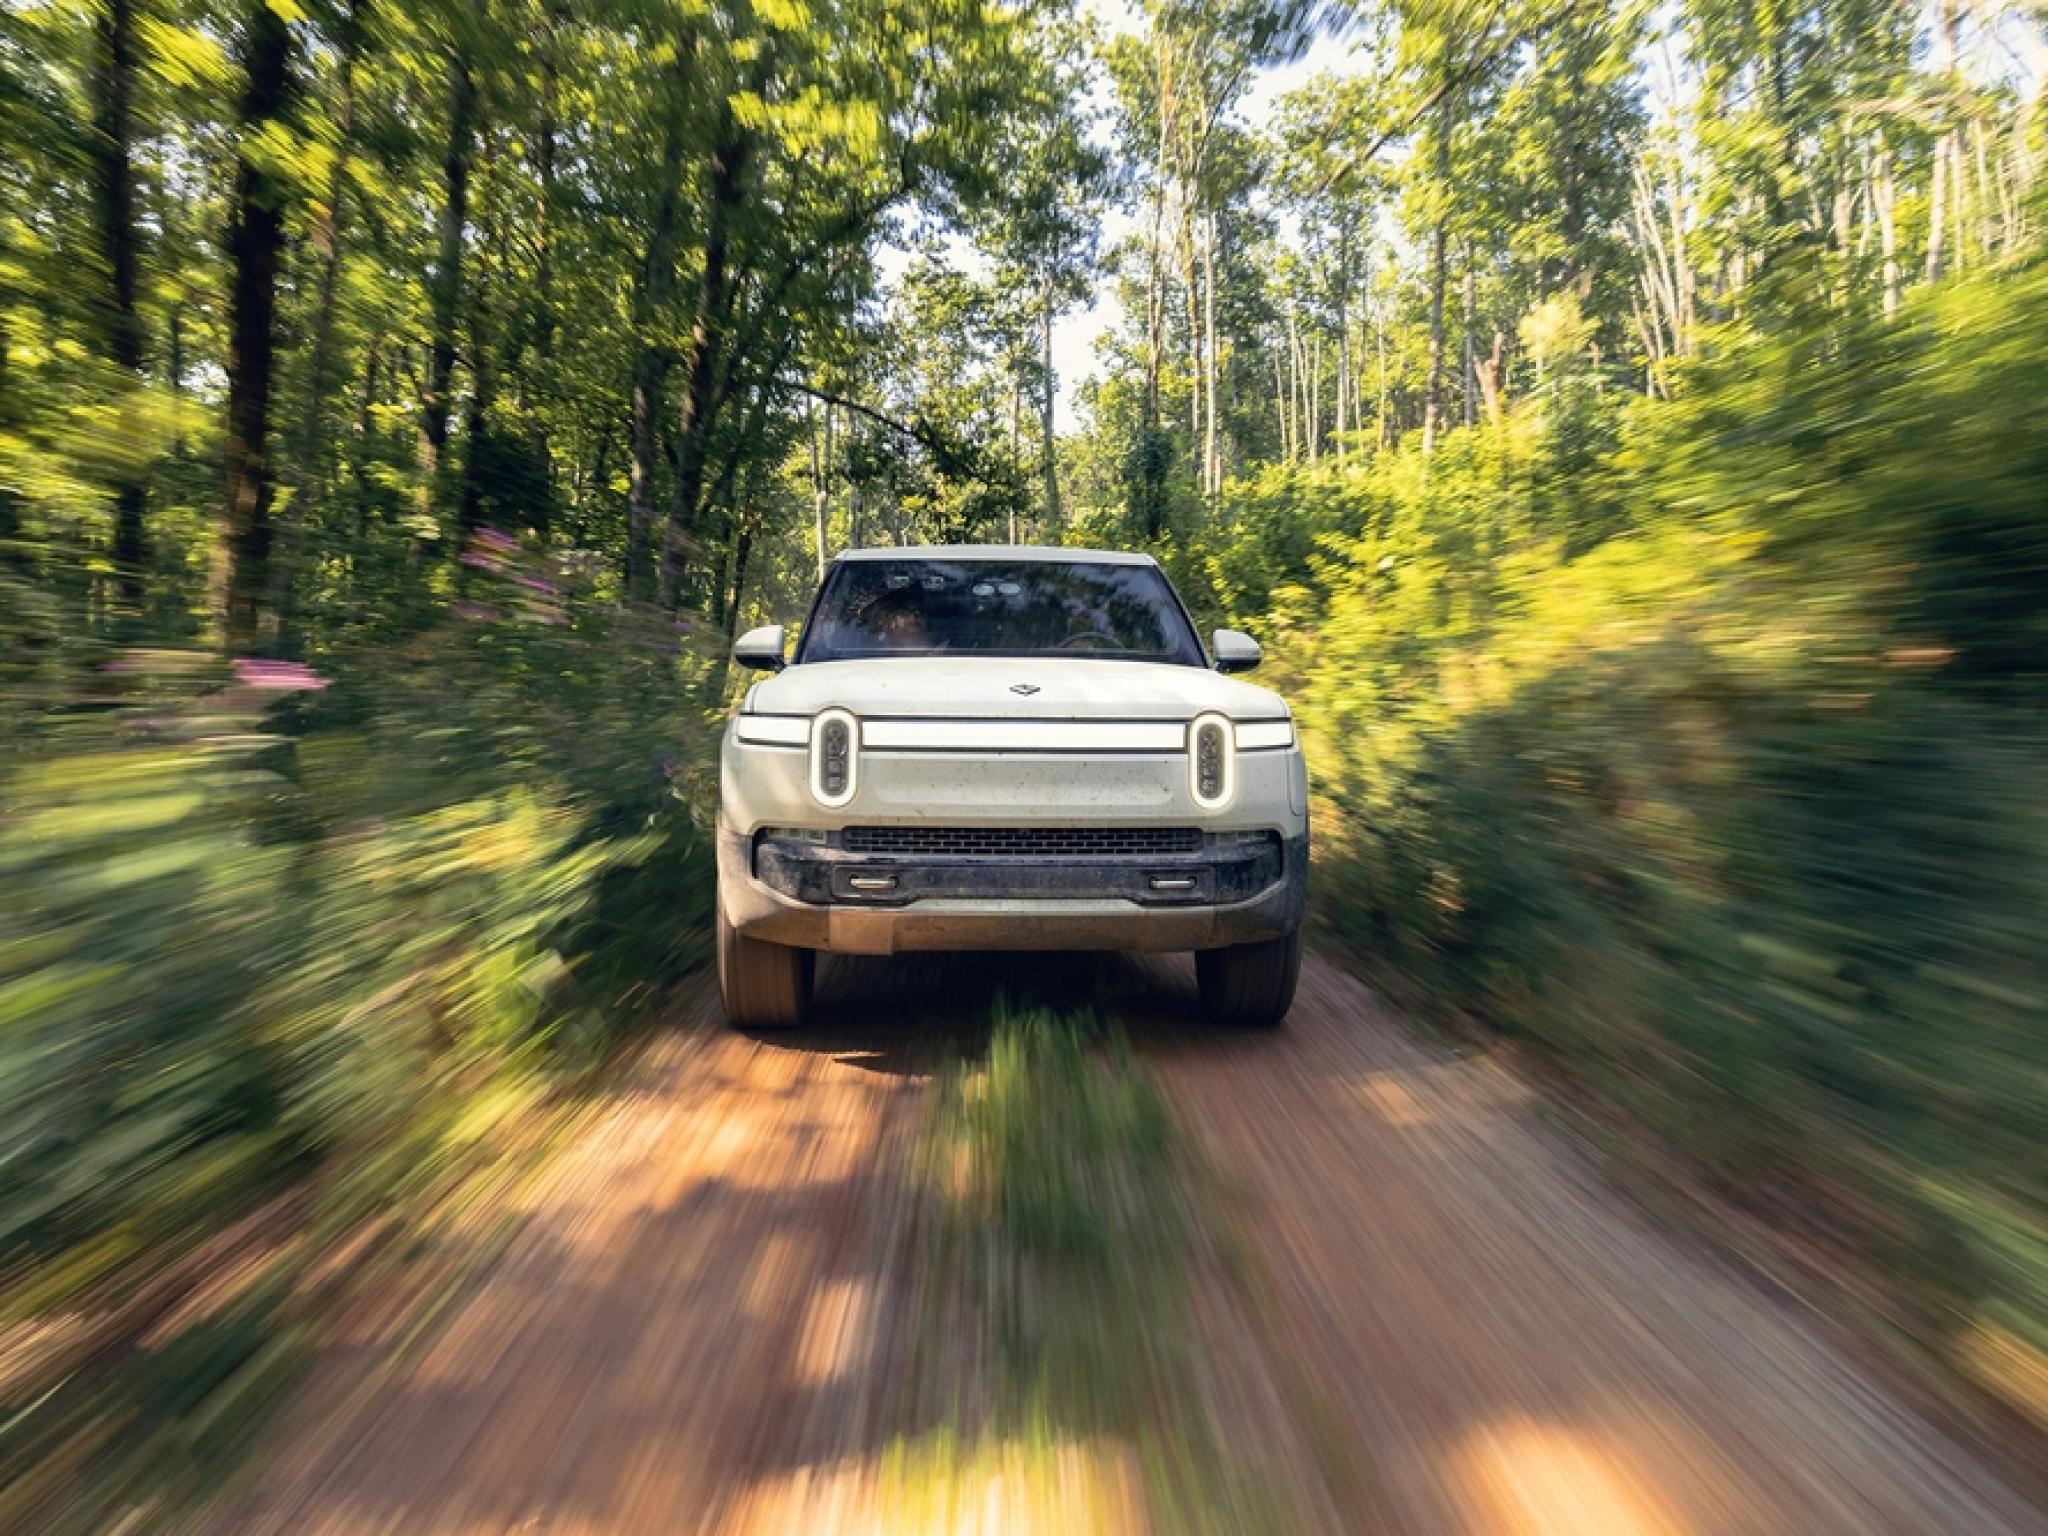  whats-going-on-with-rivian-automotive-stock 